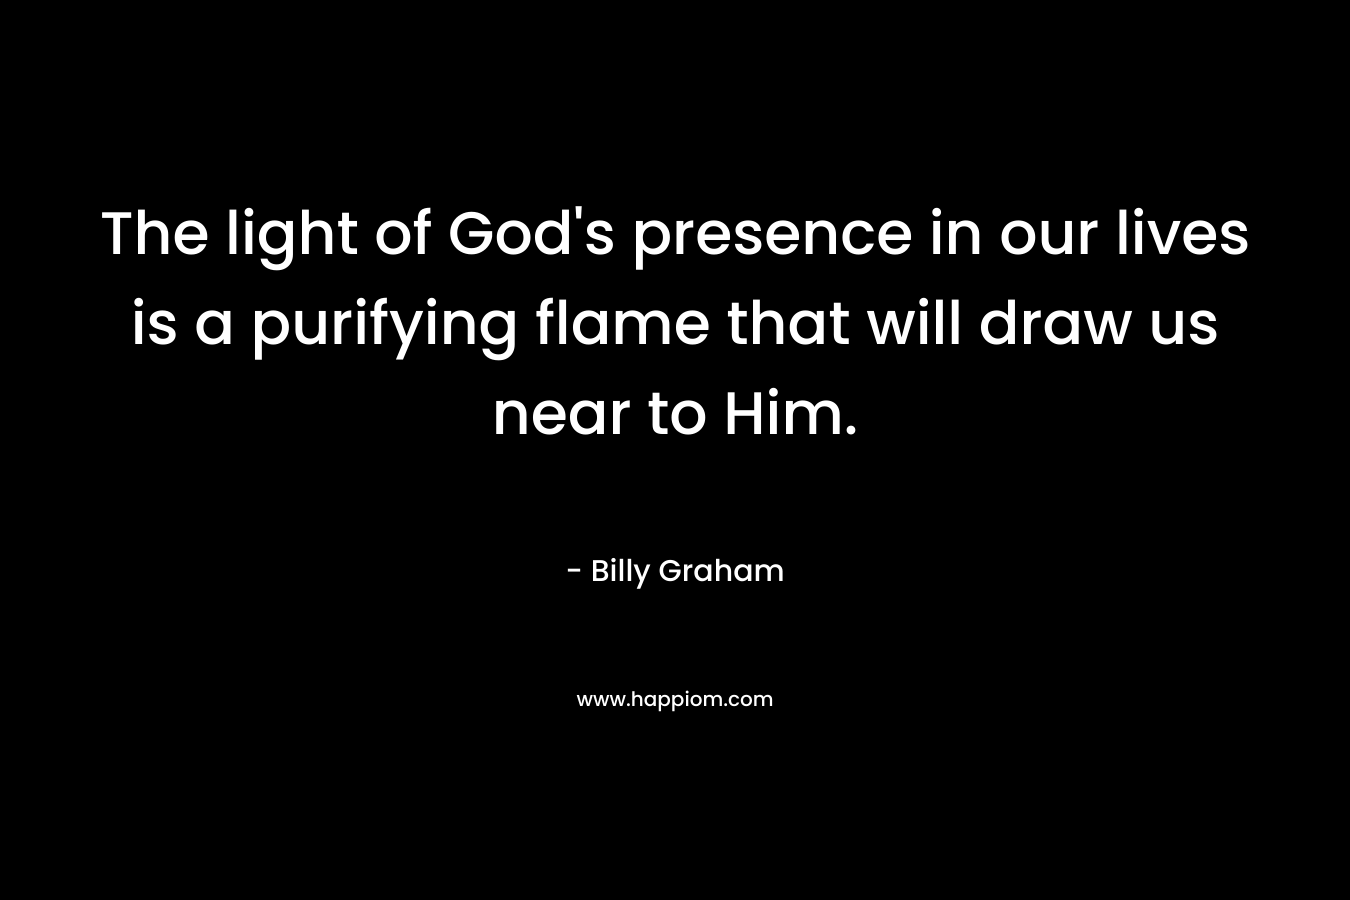 The light of God's presence in our lives is a purifying flame that will draw us near to Him.